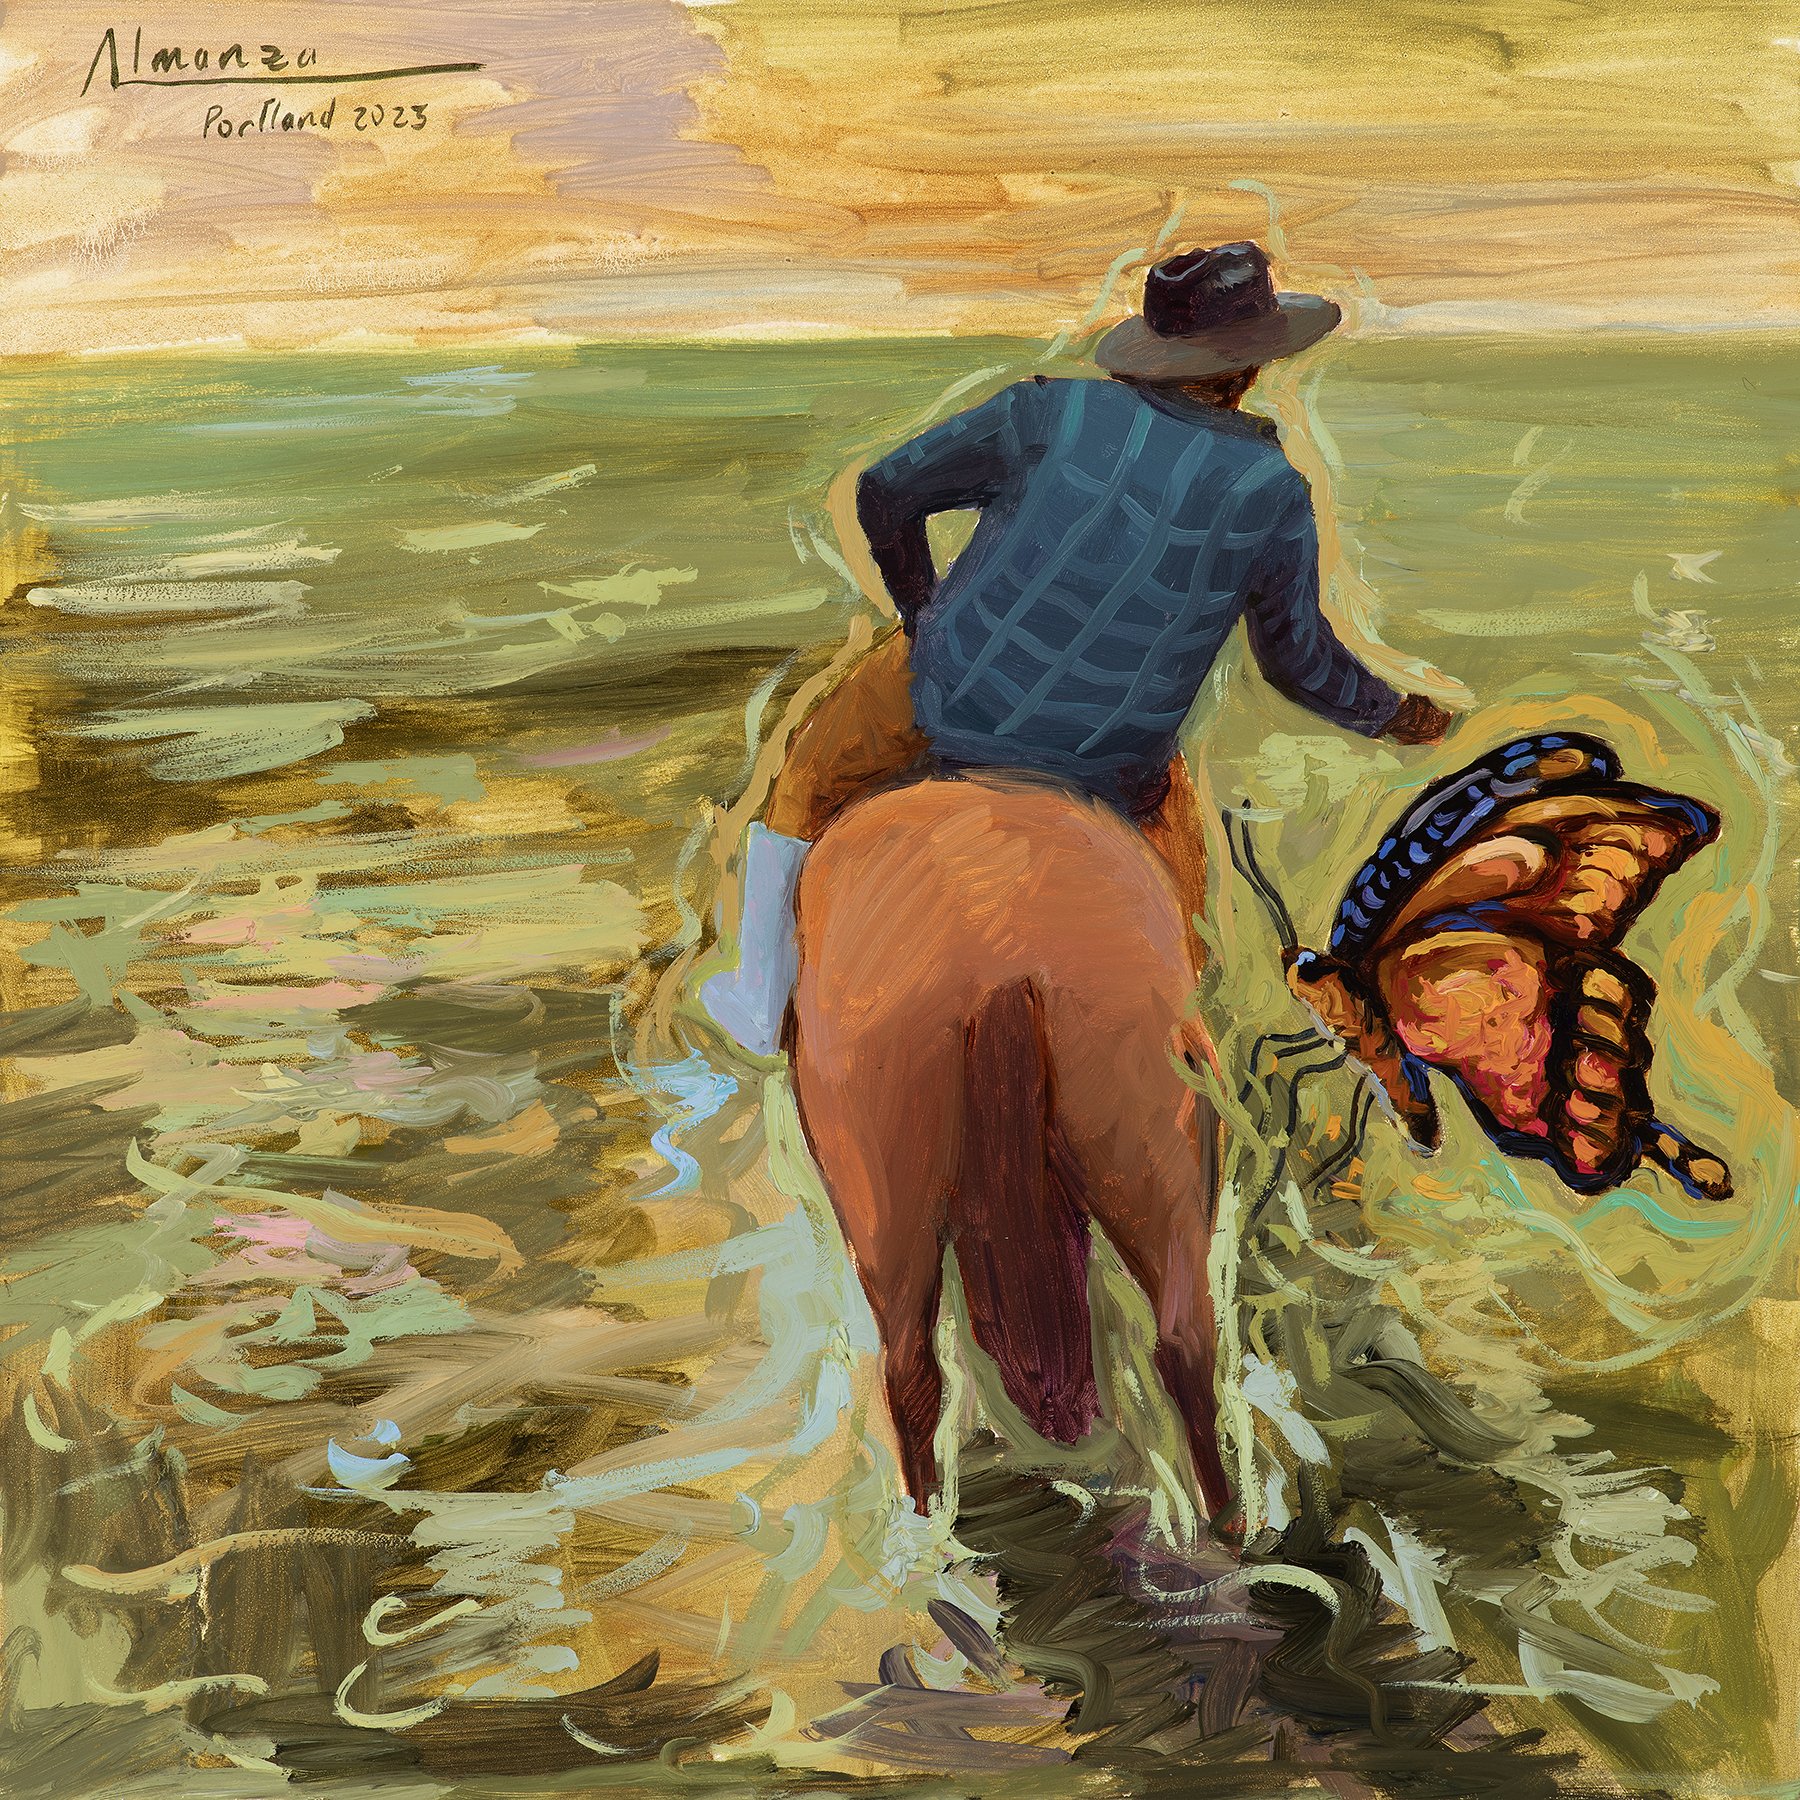 The cowboy and the Monarch butterfly